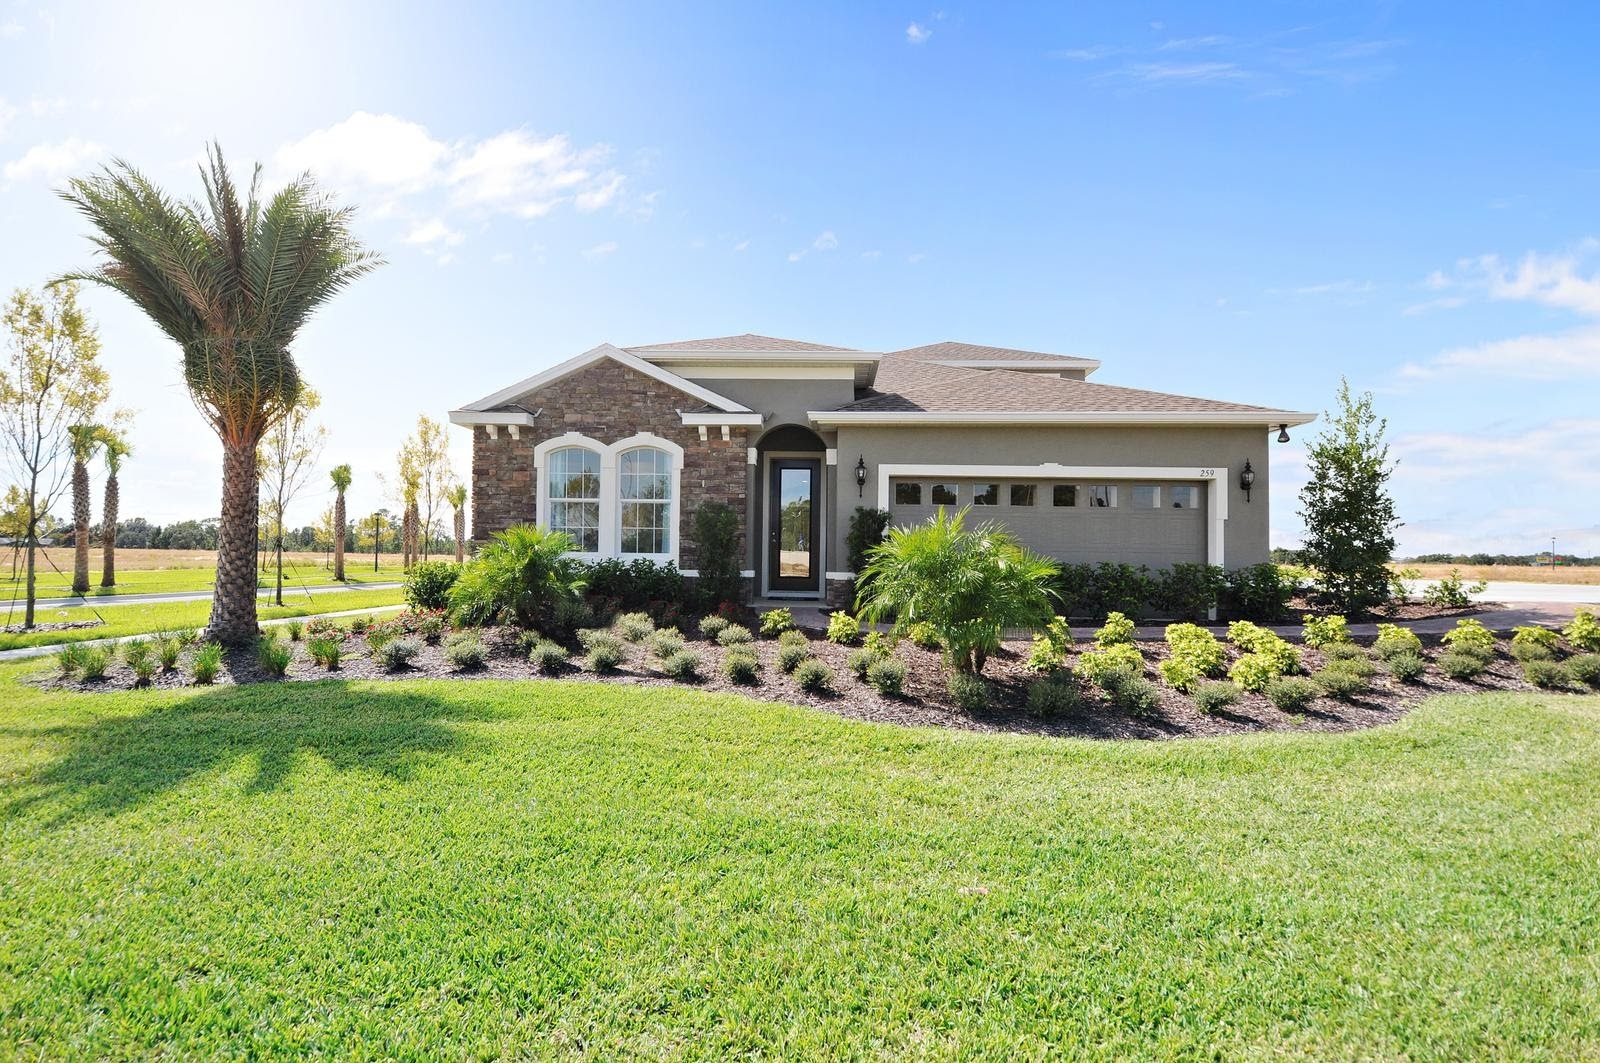 New Homes for sale at Forest Lake Estates in Ocoee, FL ...